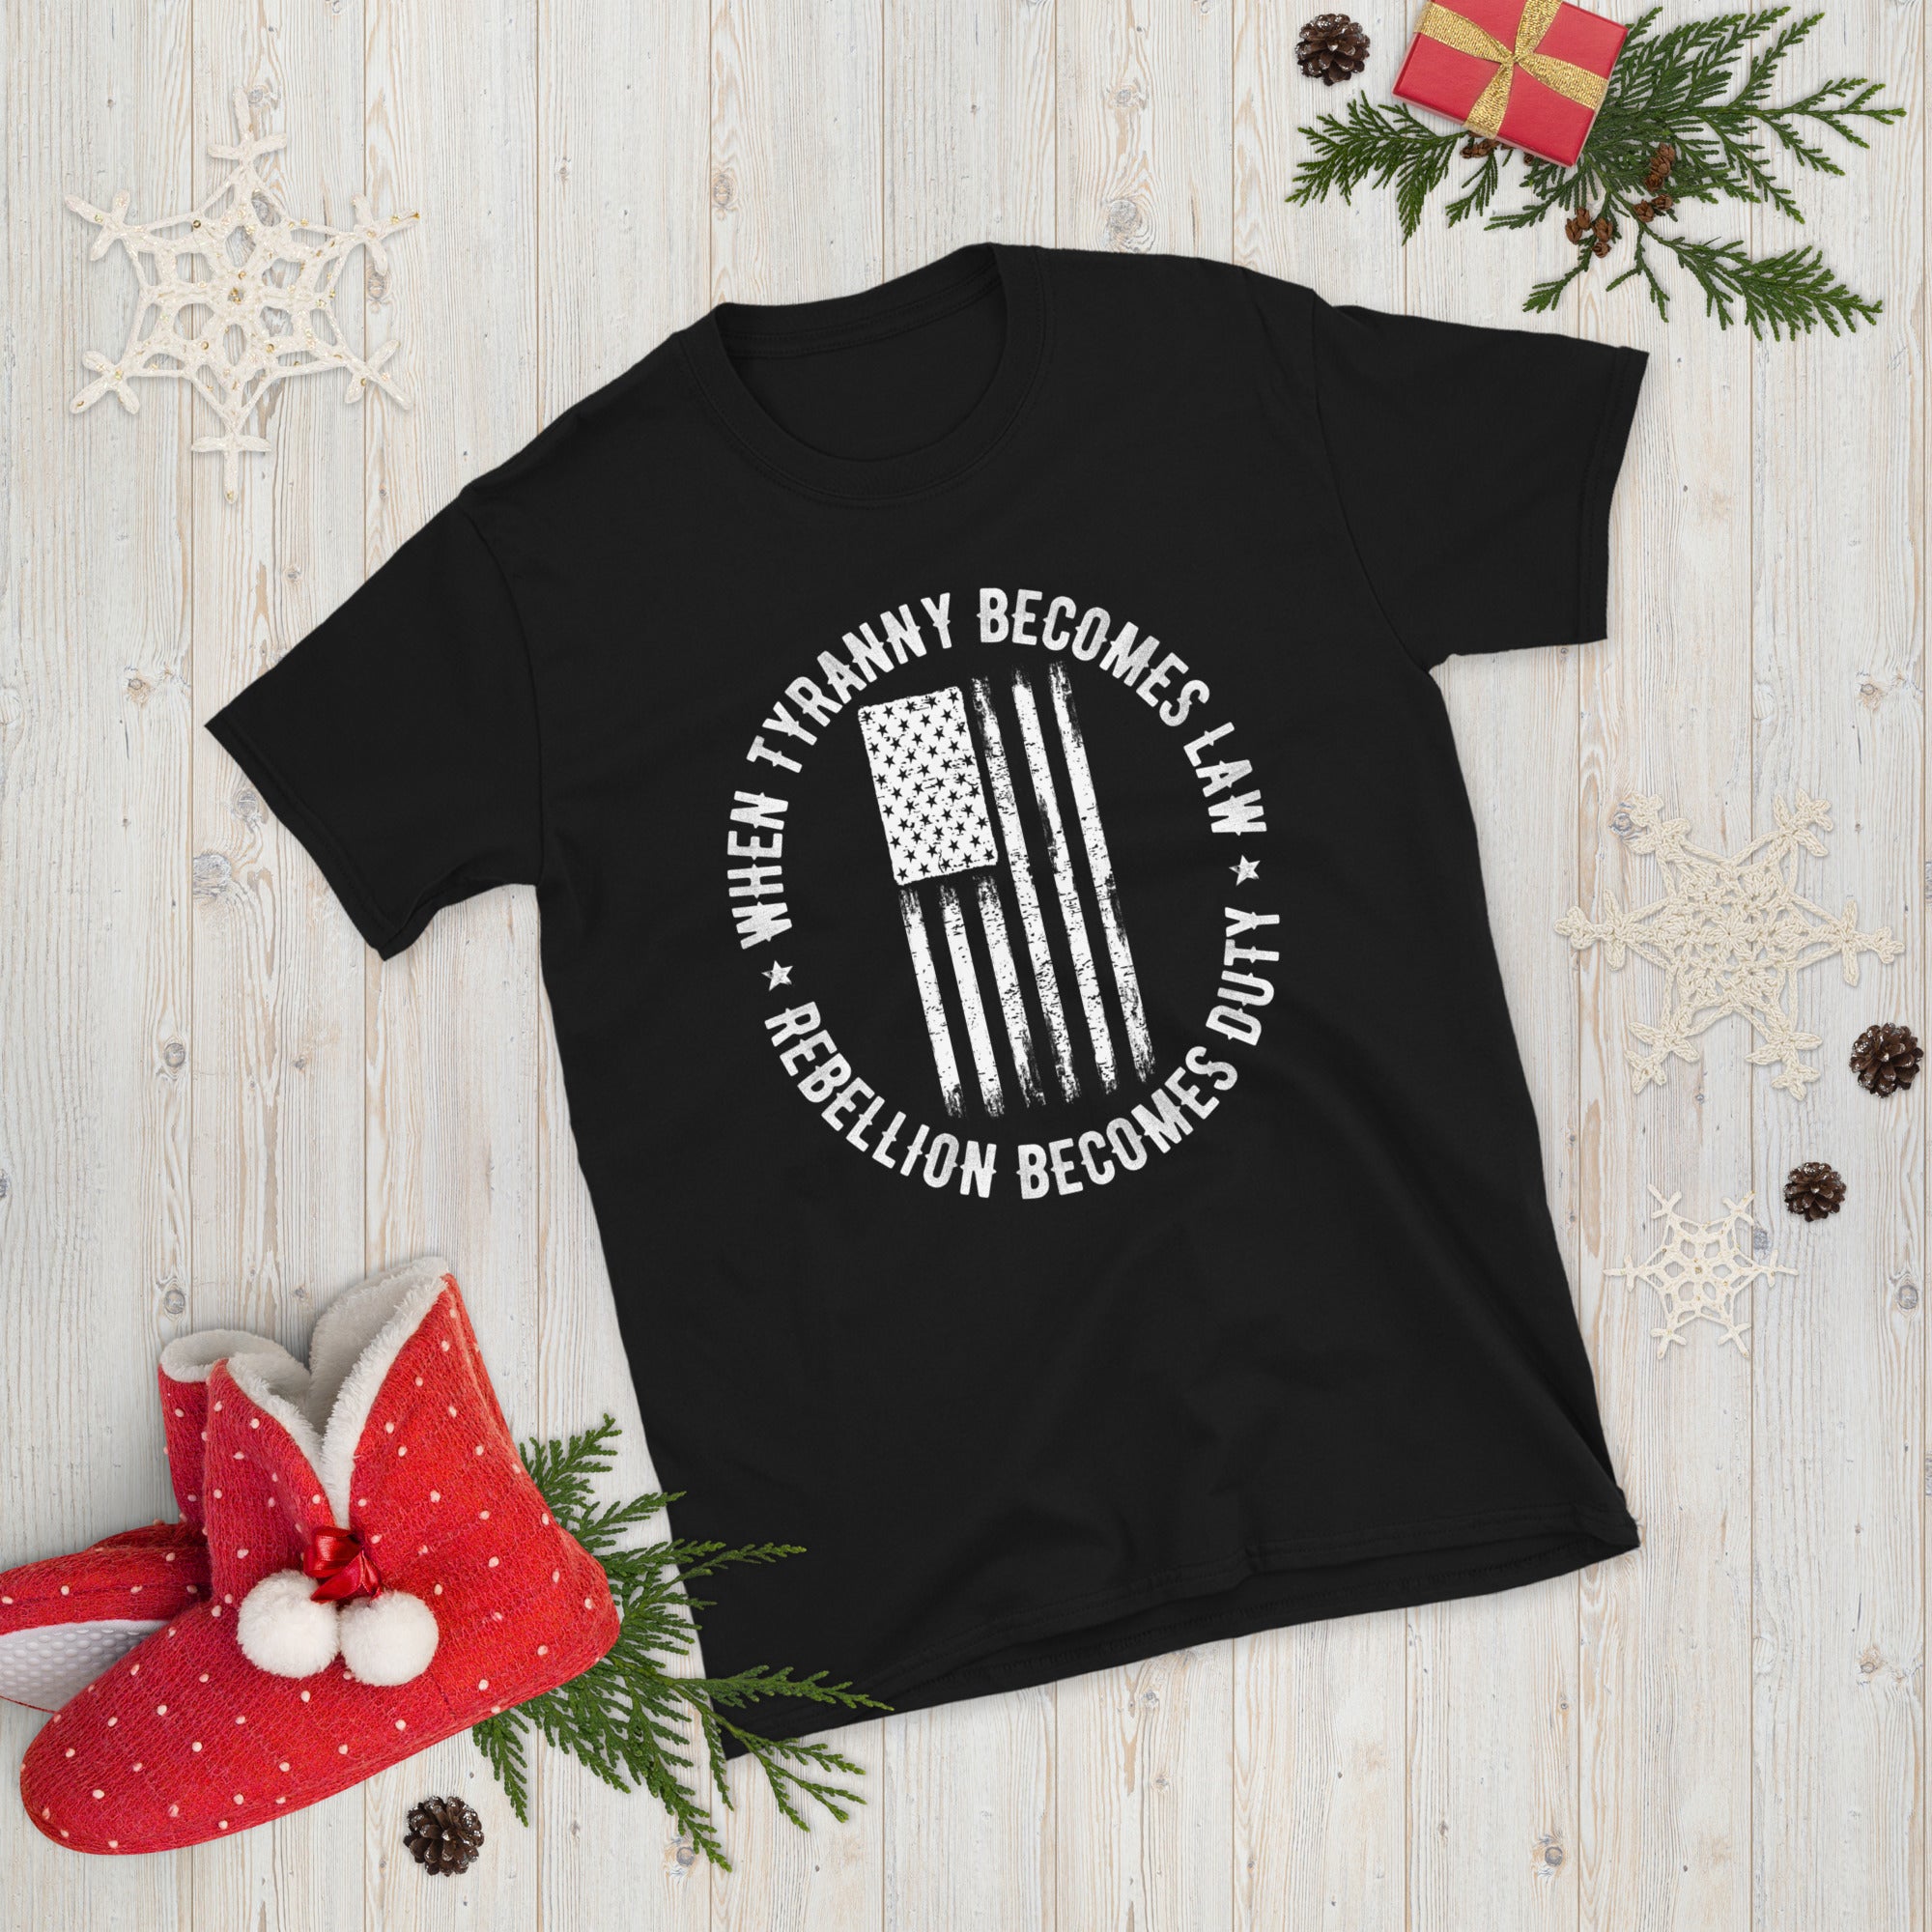 Tyranny Shirt, When Tyranny Becomes Law, Rebellion Becomes Duty, 1776 Shirt, Freedom Shirt, Thomas Jefferson Quote, Patriotic Gifts, Patriot - Madeinsea©